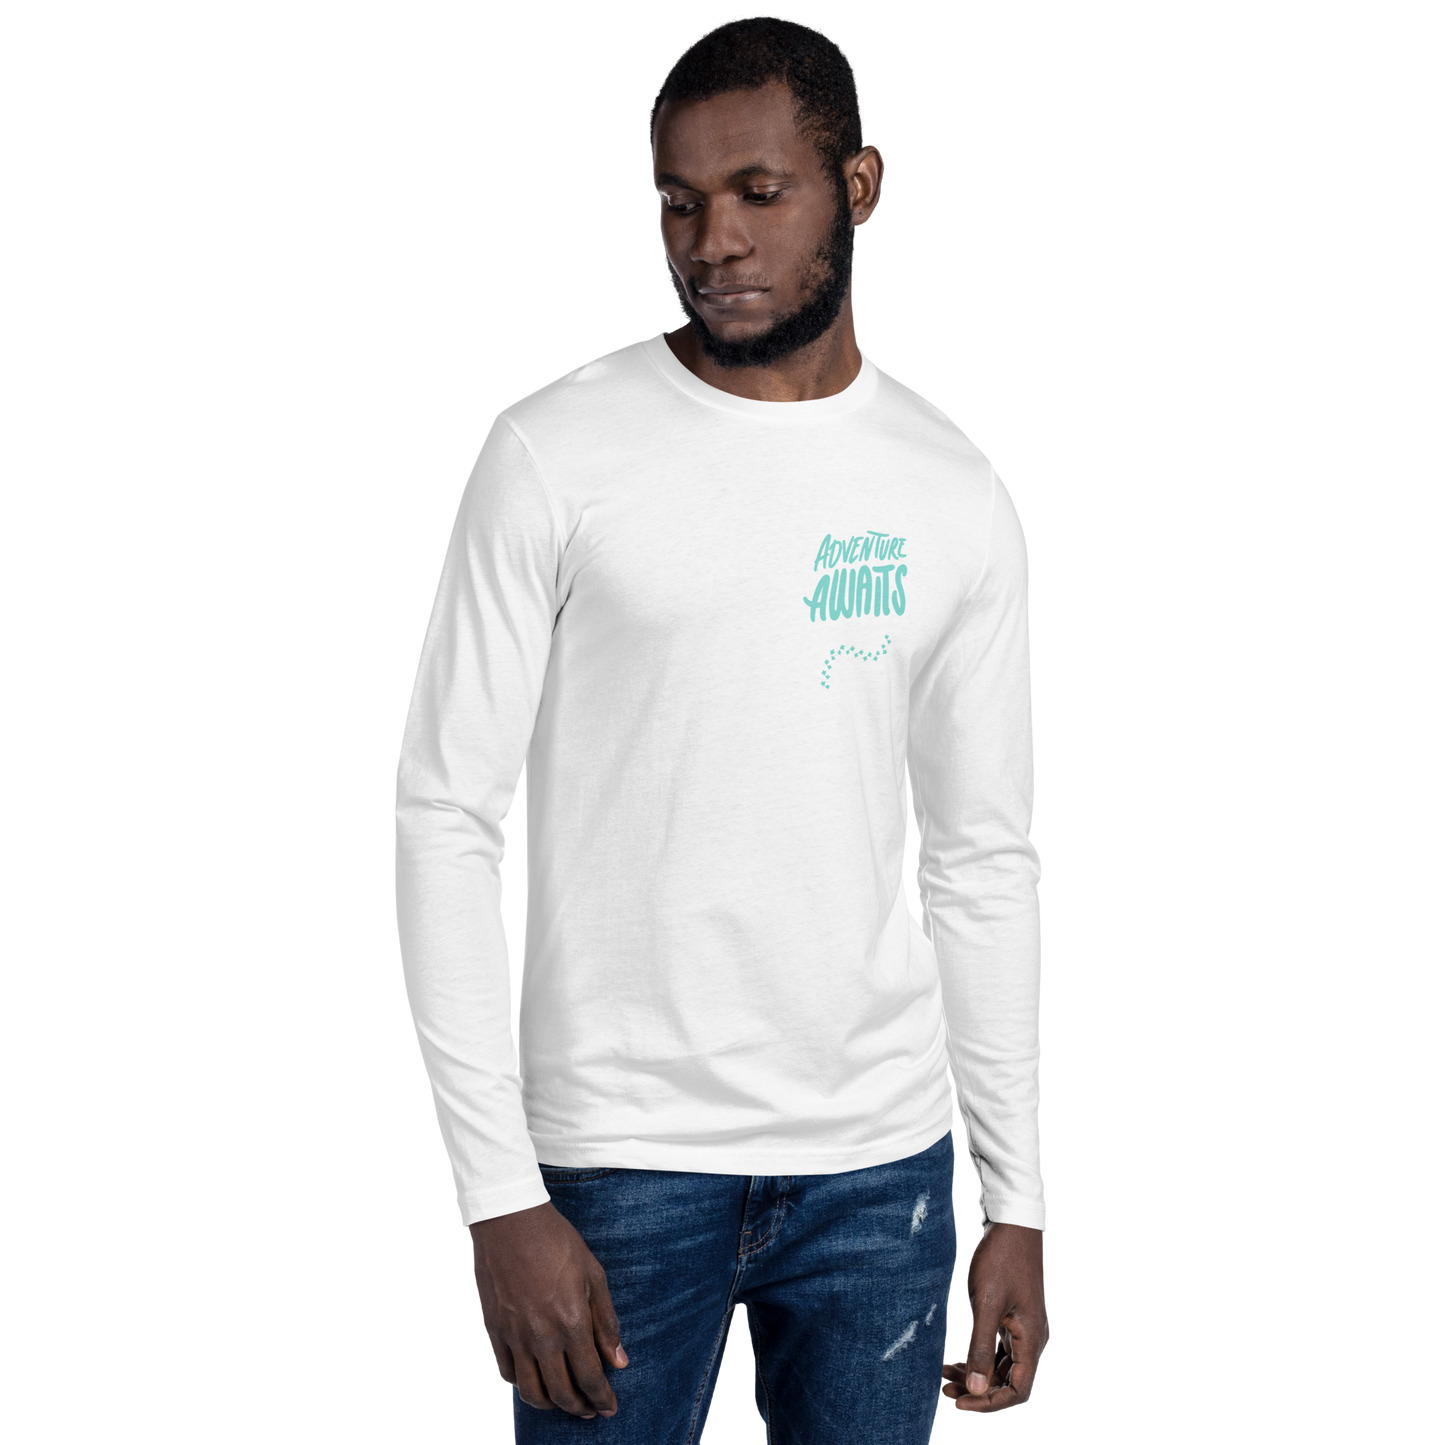 "Adventure Awaits" - Men's Long Sleeve Fitted Crew Top